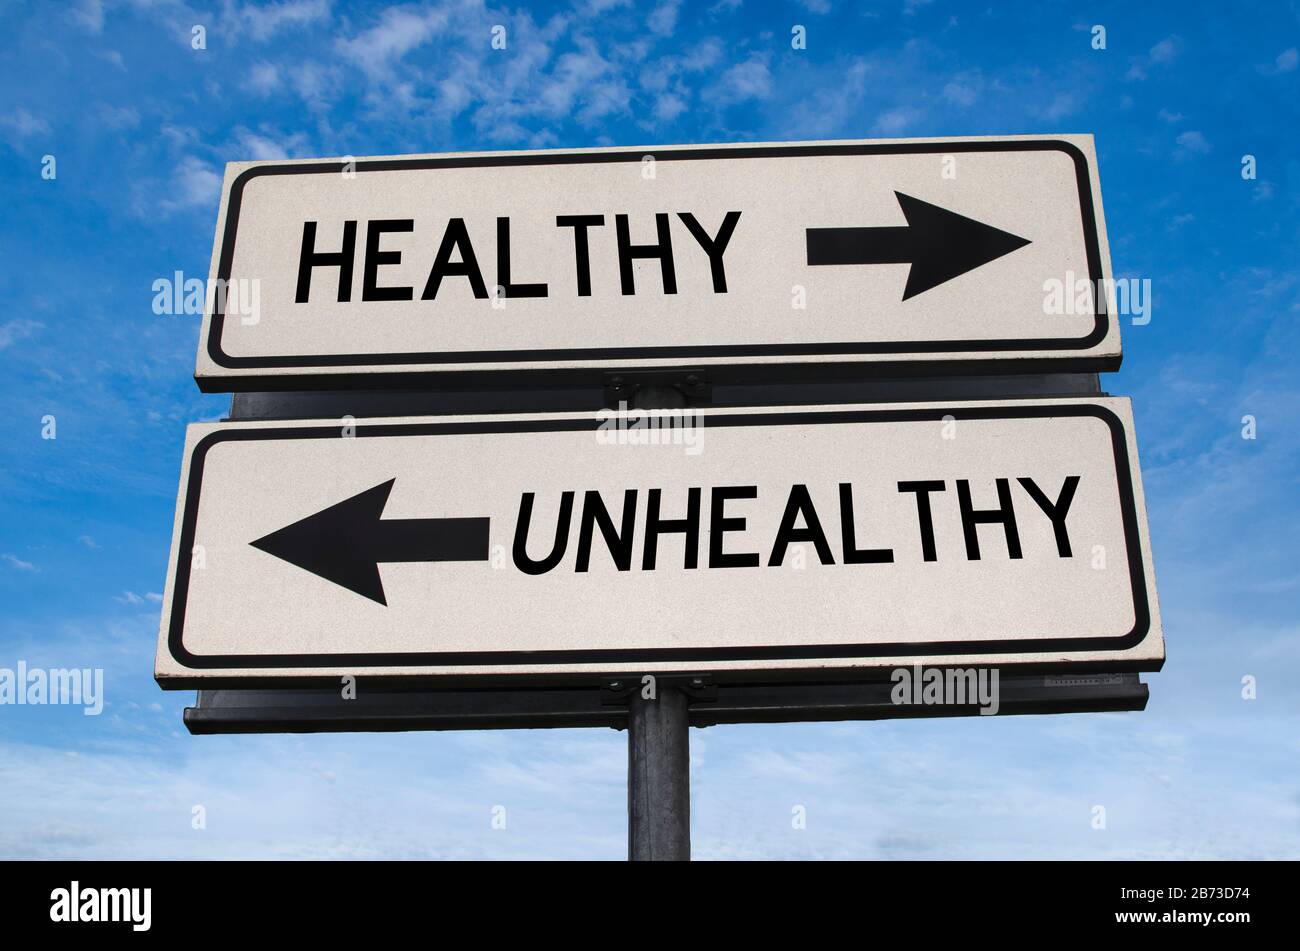 Unhealthy vs healthy. White two street signs with arrow on metal pole with word. Directional road. Crossroads Road Sign, Two Arrow. Blue background Stock Photo